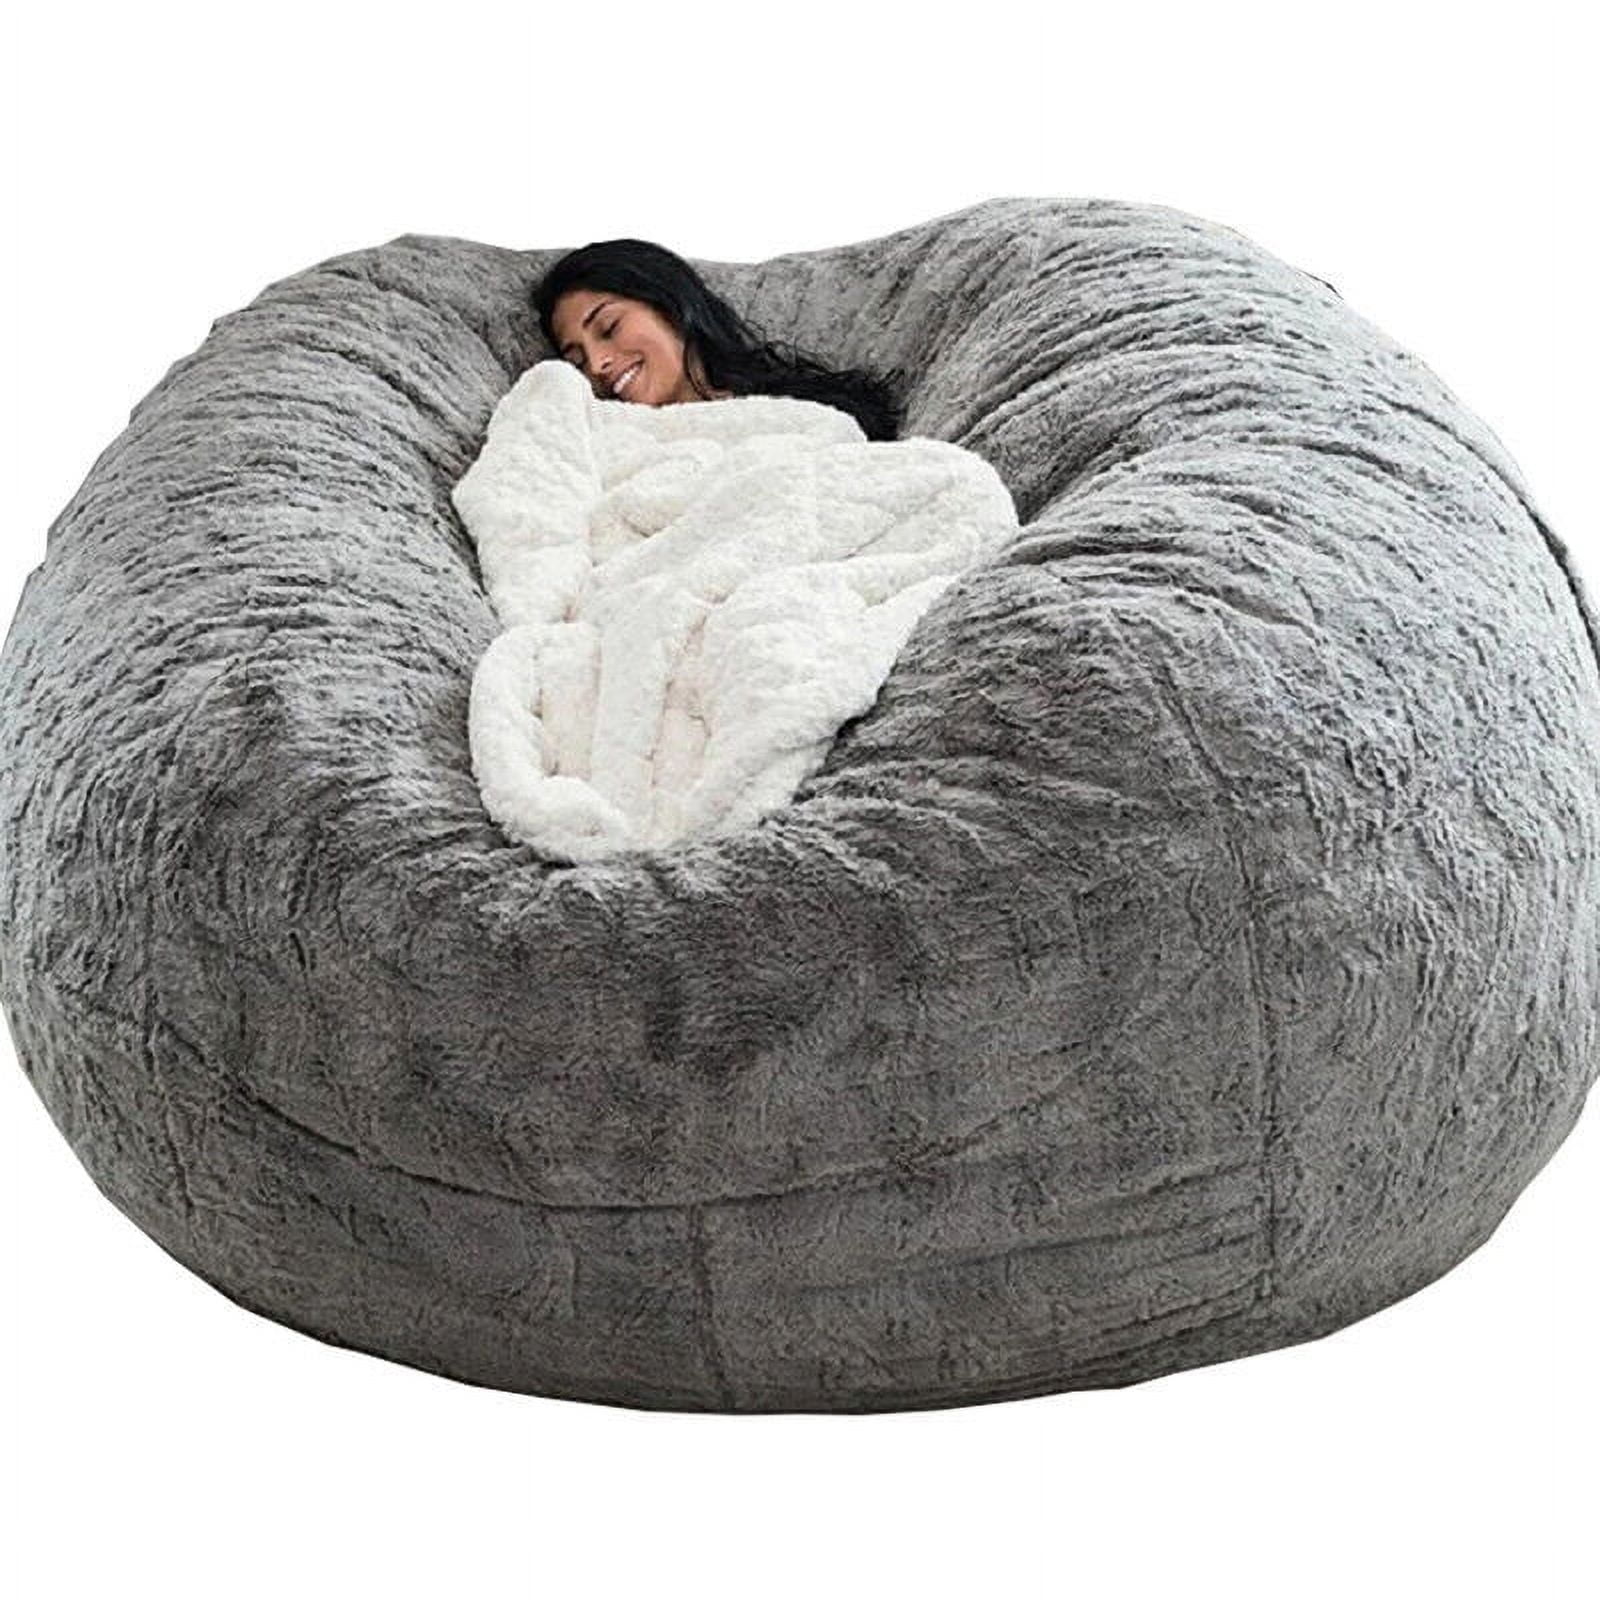 6FT Large Bean Bag Sofa Cover, Living Room Lazy Lounger Chair Protect Cover  for Adults Kids, No Filling, Light Grey 